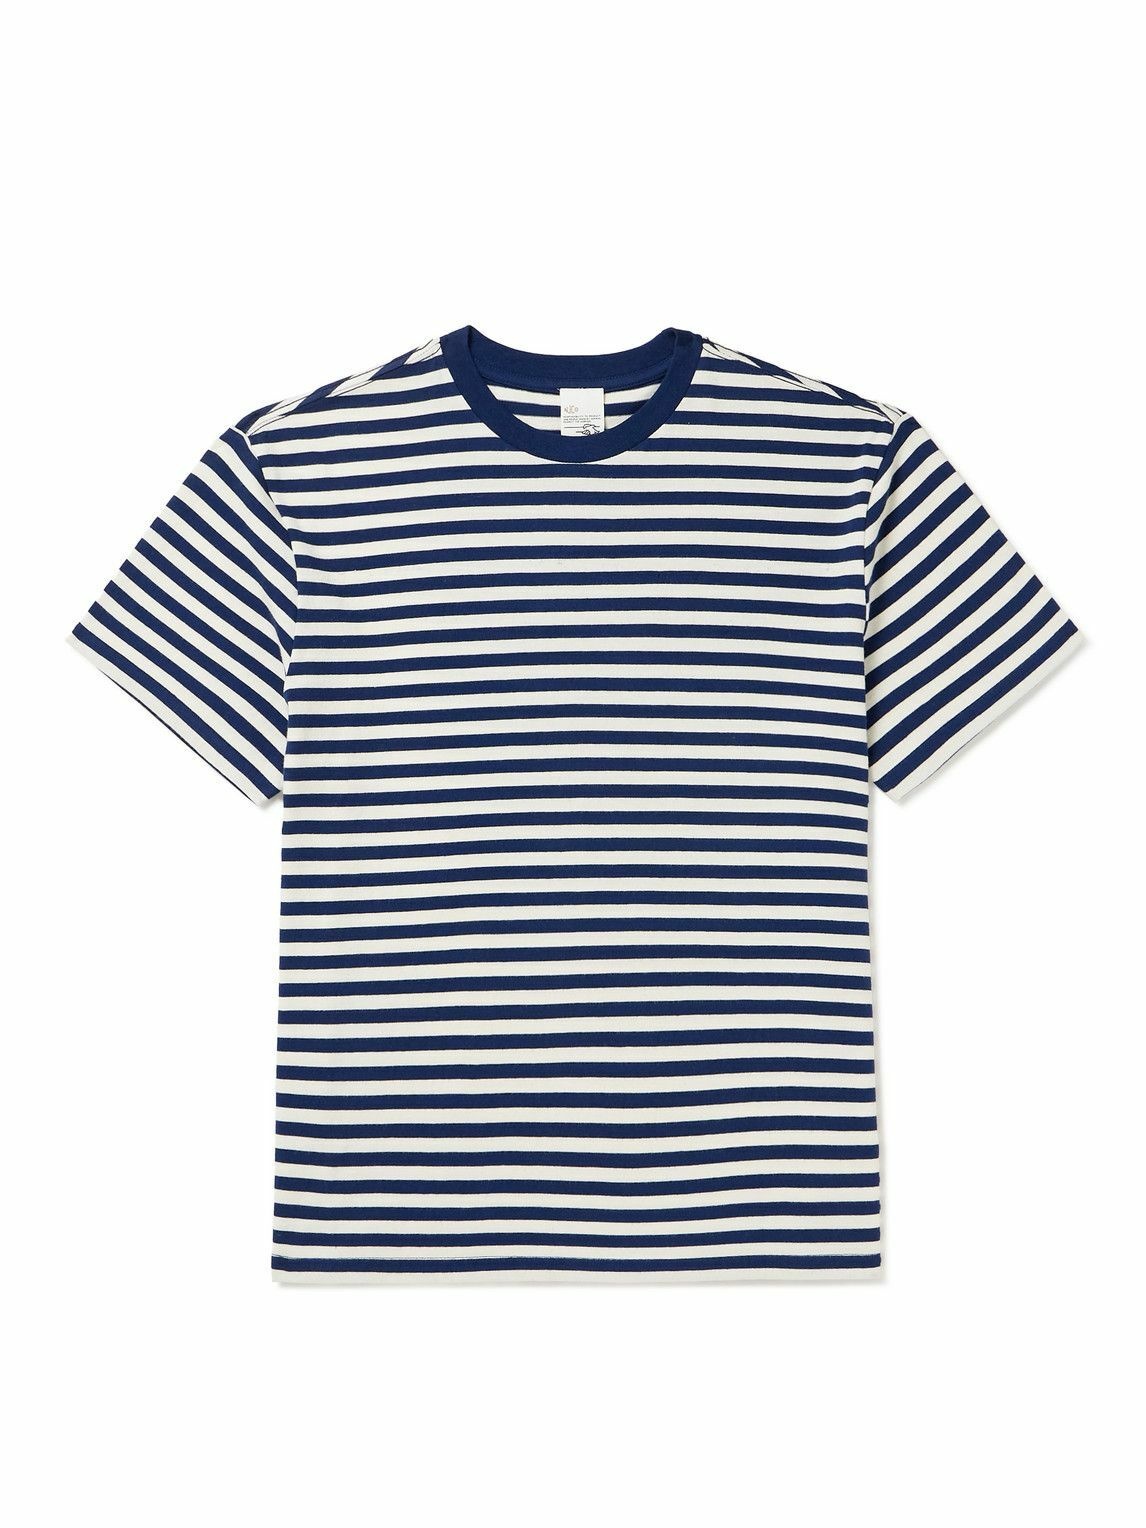 Photo: Nudie Jeans - Leffe Striped Cotton-Jersey T-Shirt - Multi